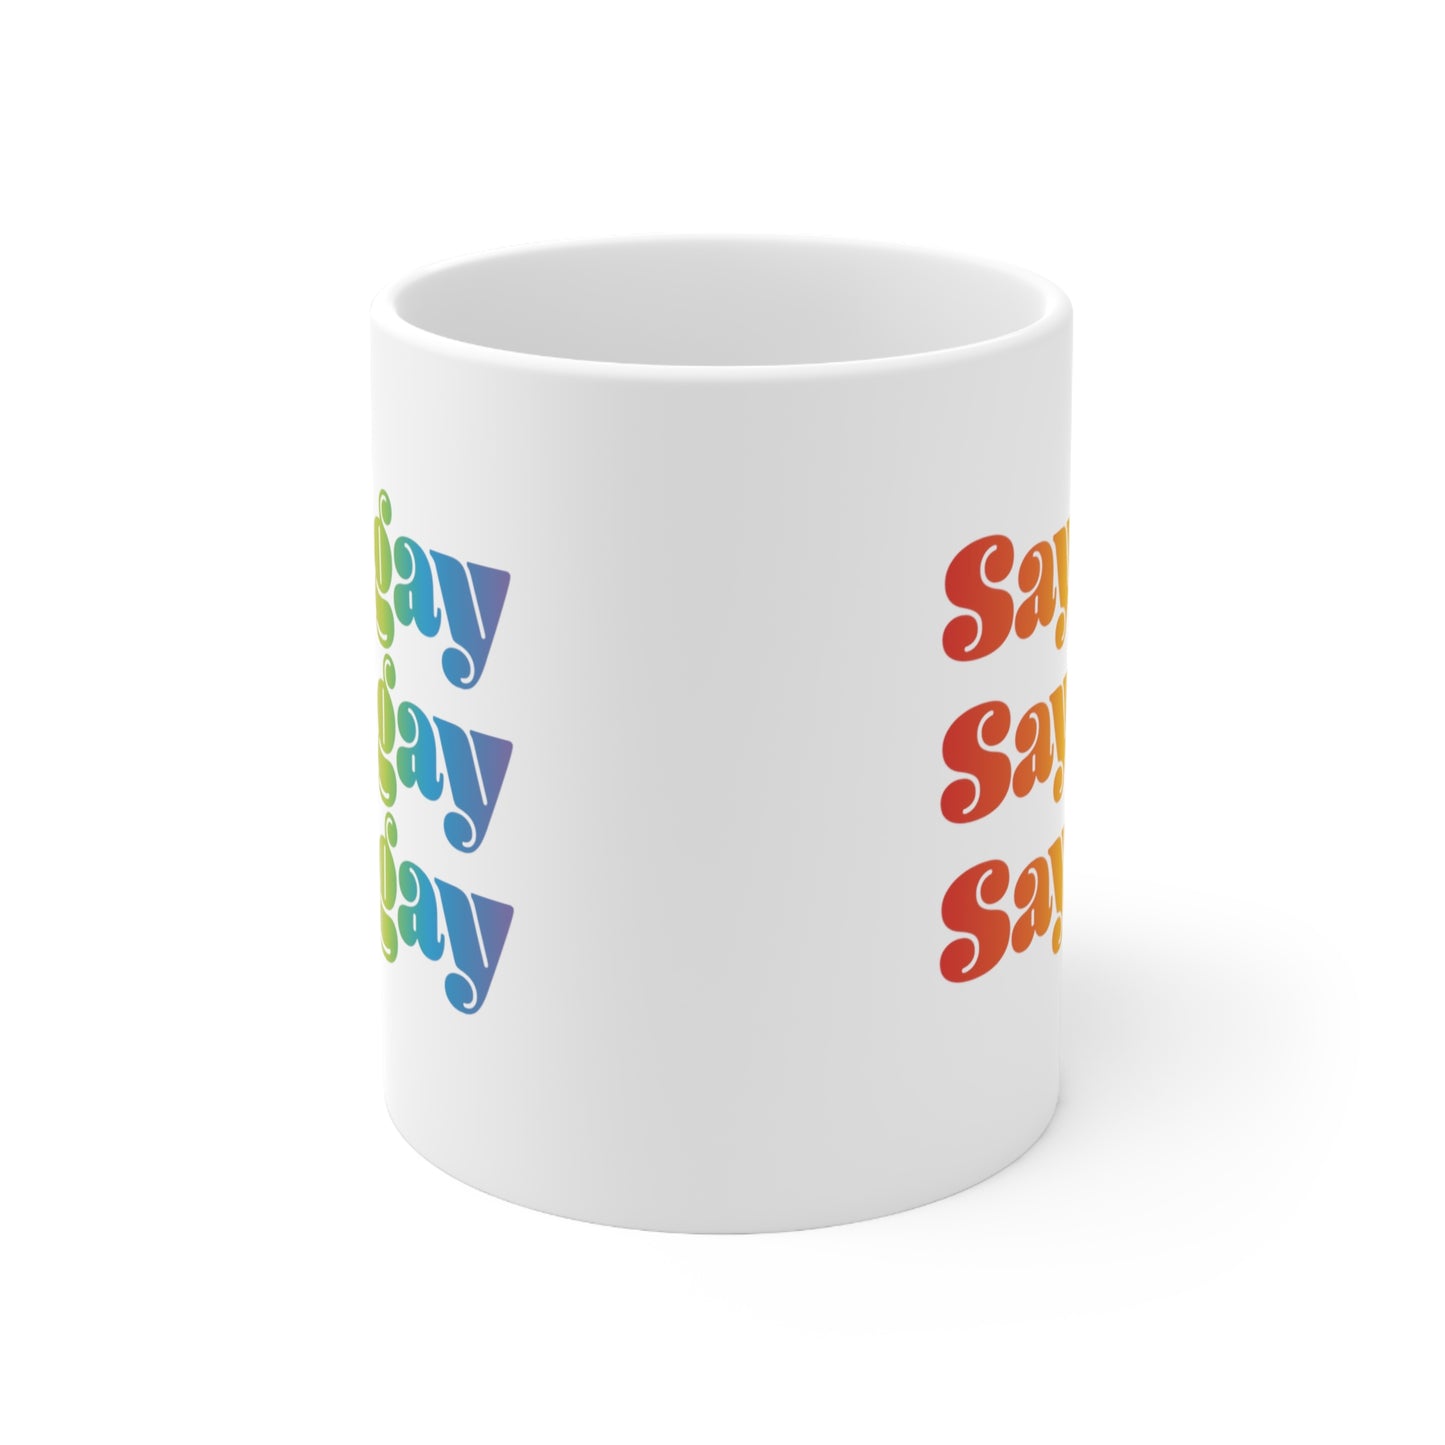 11oz white ceramic mug that reads “Say gay” x3 rows in a thick, rainbow font. This angle only shows the edges of the design.